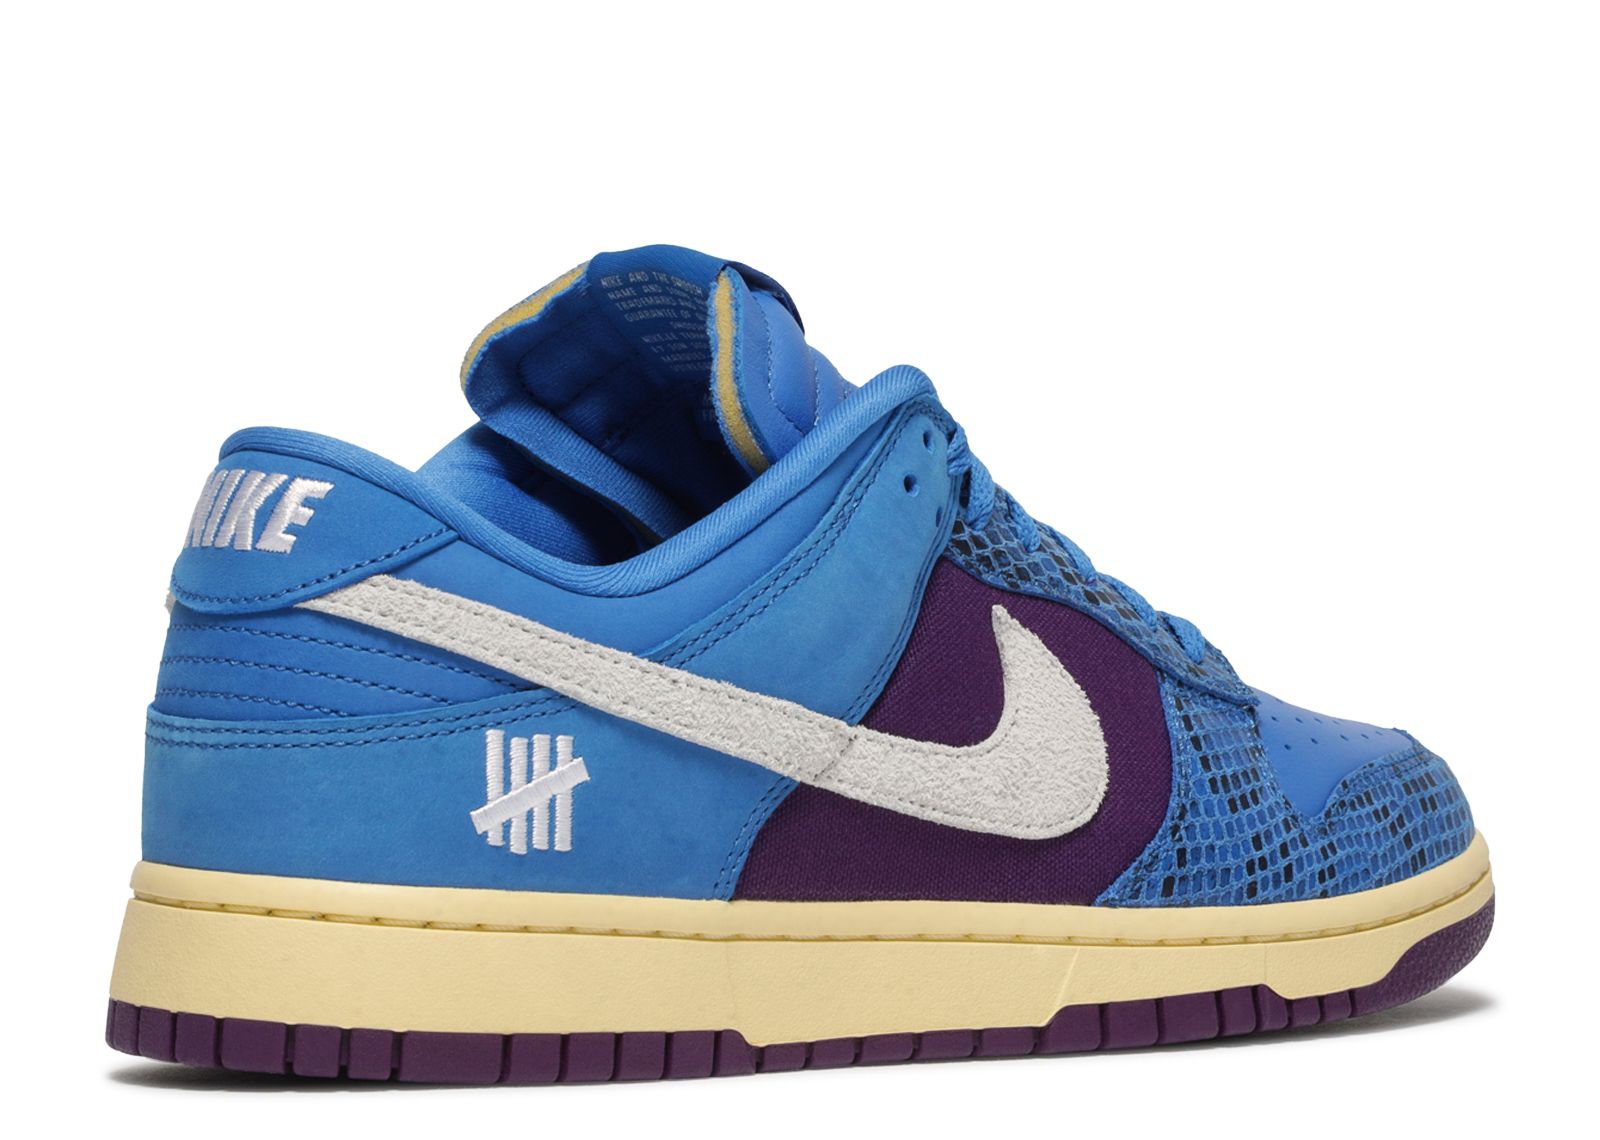 Undefeated X Dunk Low SP '5 On It' - Nike - DH6508 400 - signal 